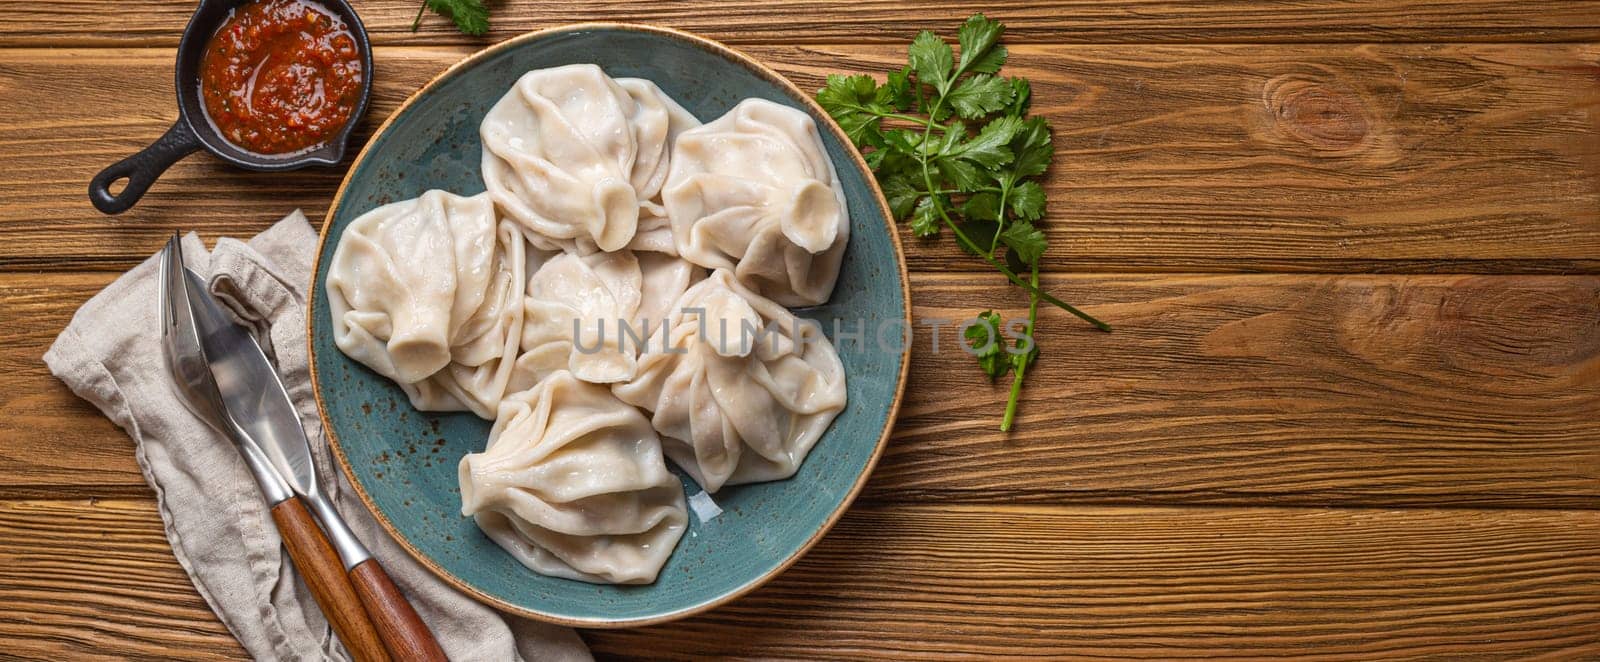 Georgian dumplings Khinkali on plate with red tomato sauce and fresh cilantro top view, rustic wooden background, traditional dish of Georgia, space for text by its_al_dente